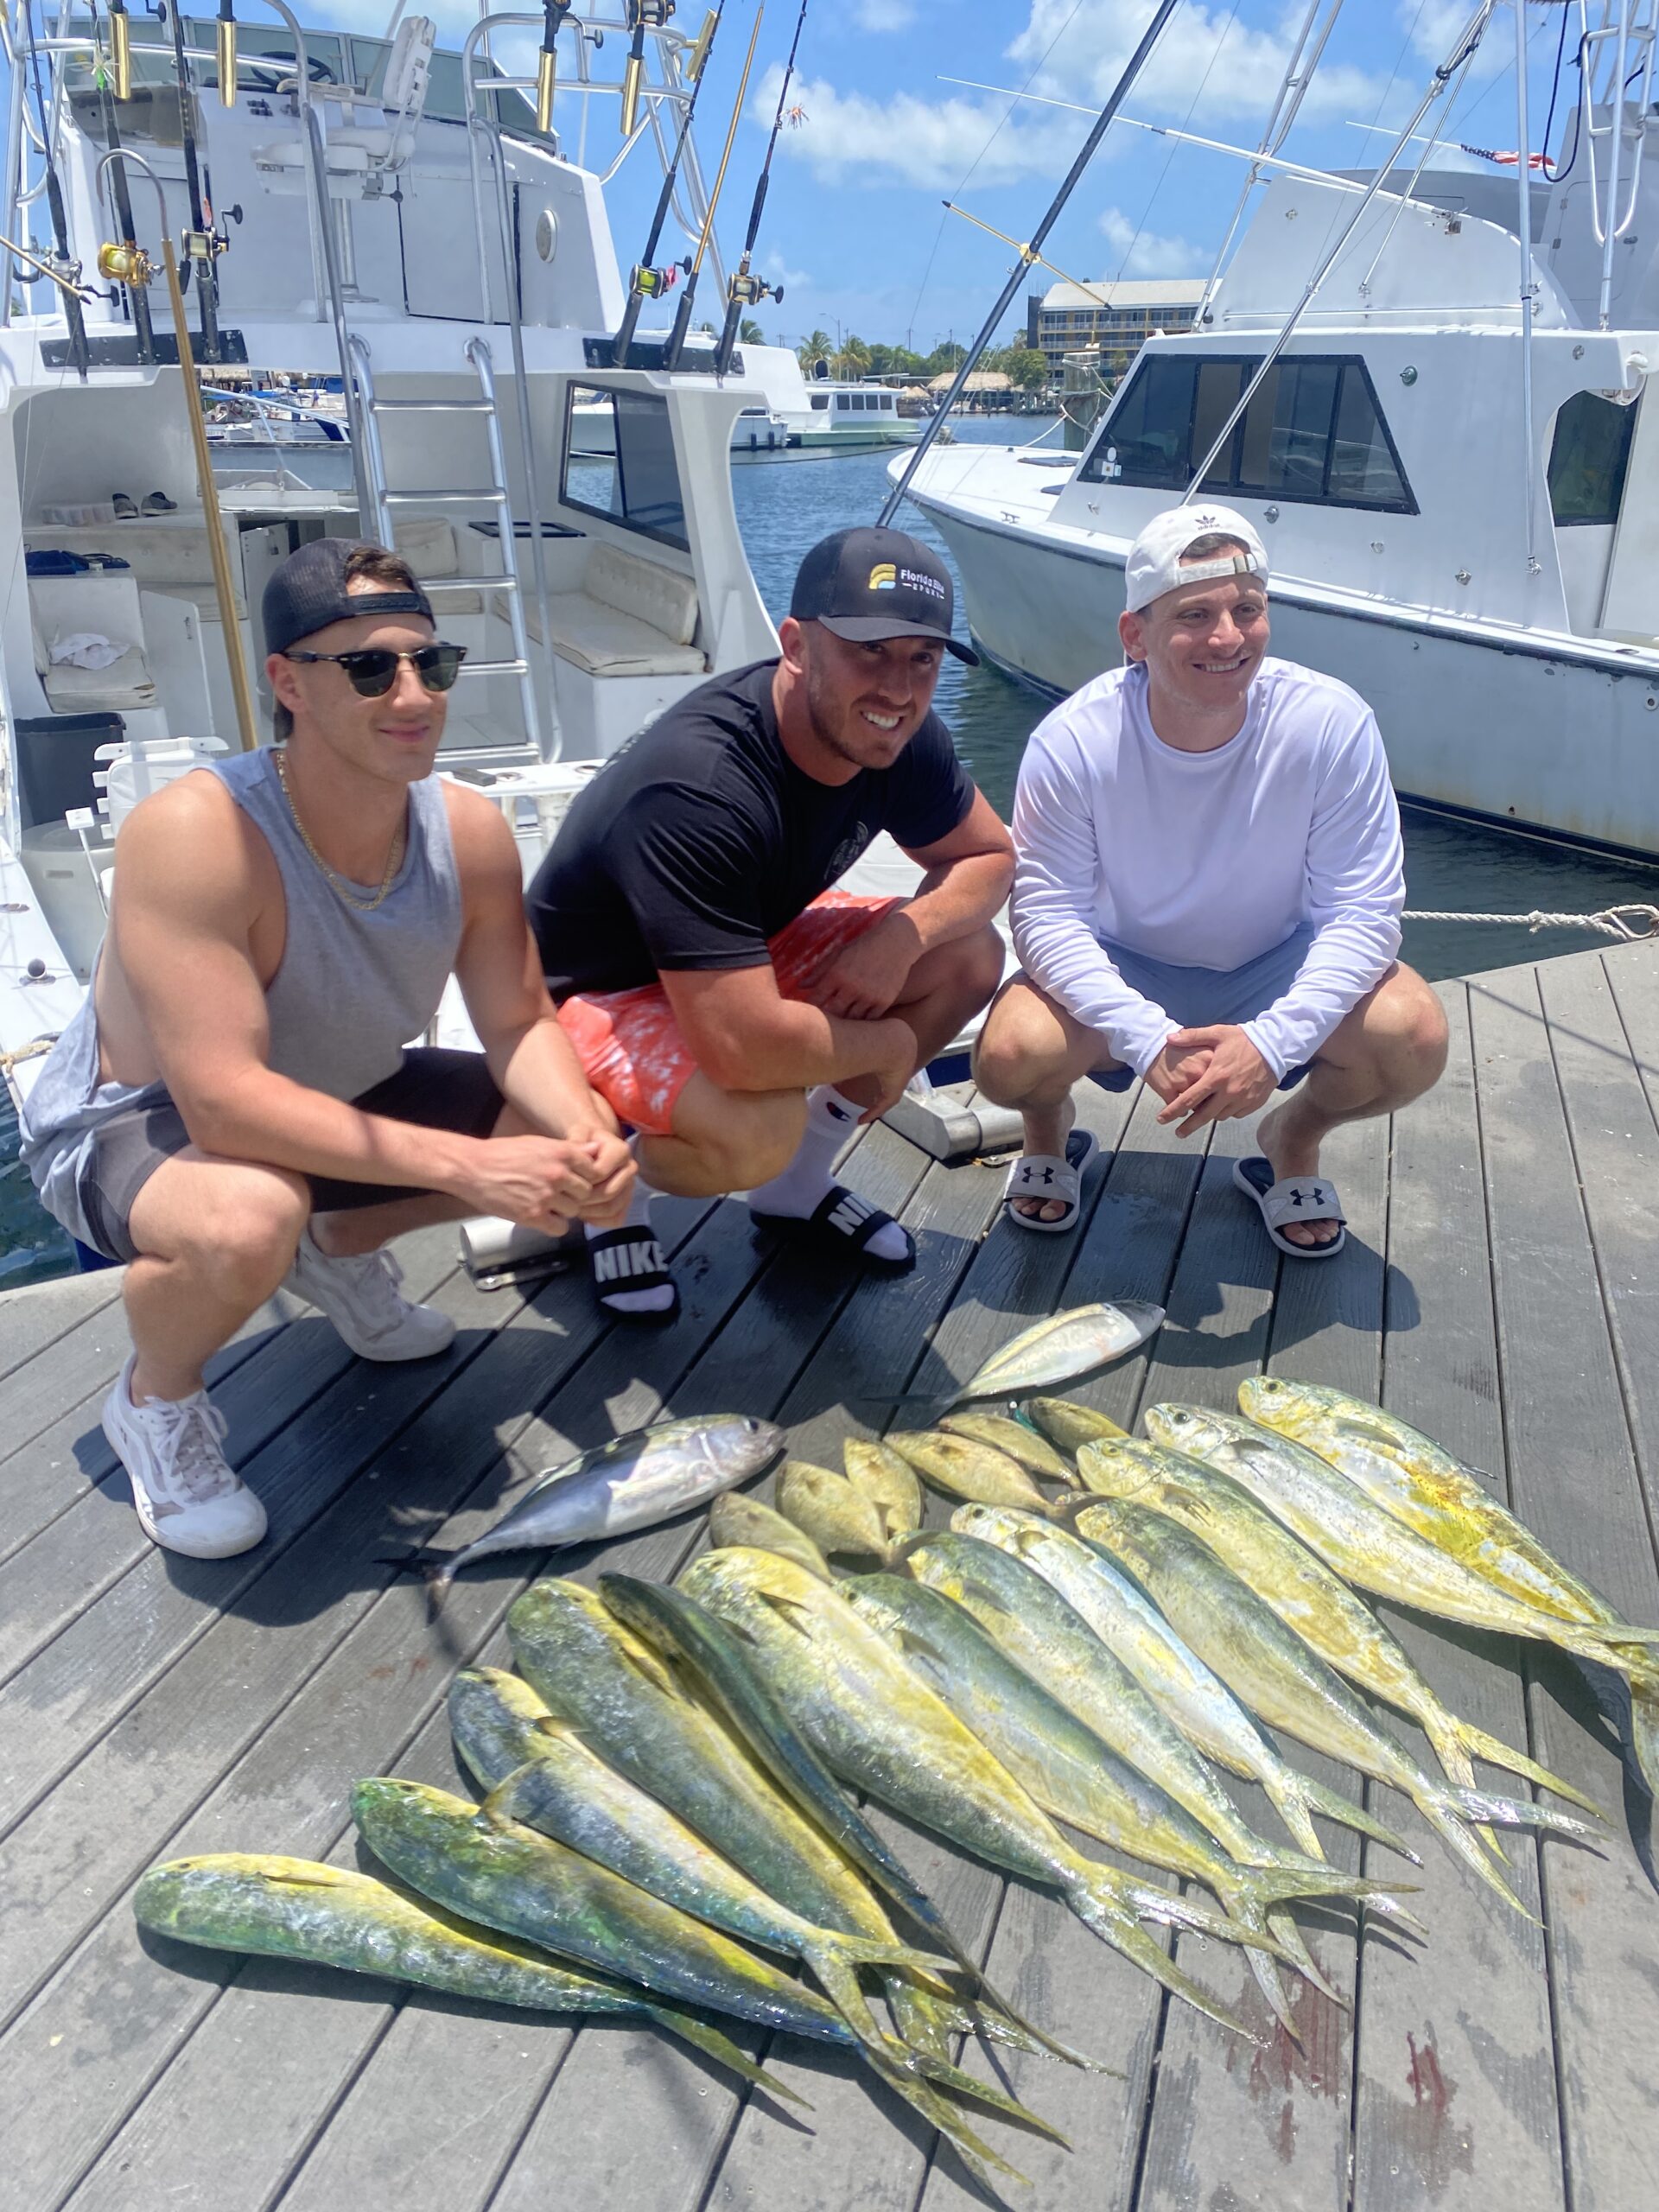 Some nice Mahi out here today!